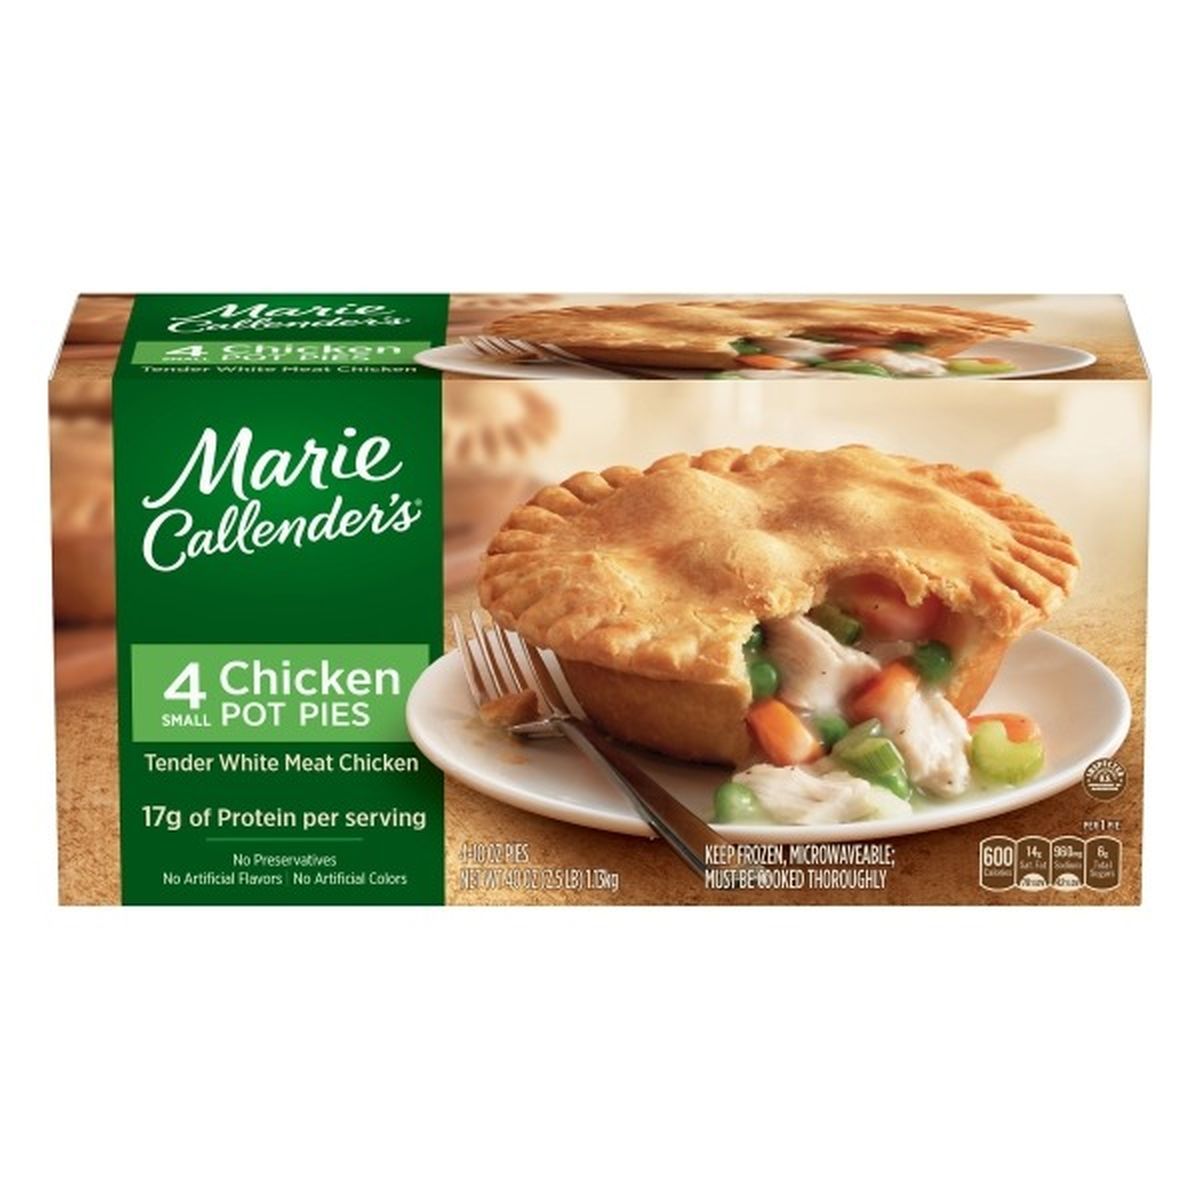 Calories in Marie Callender's Chicken Pot Pies, Small